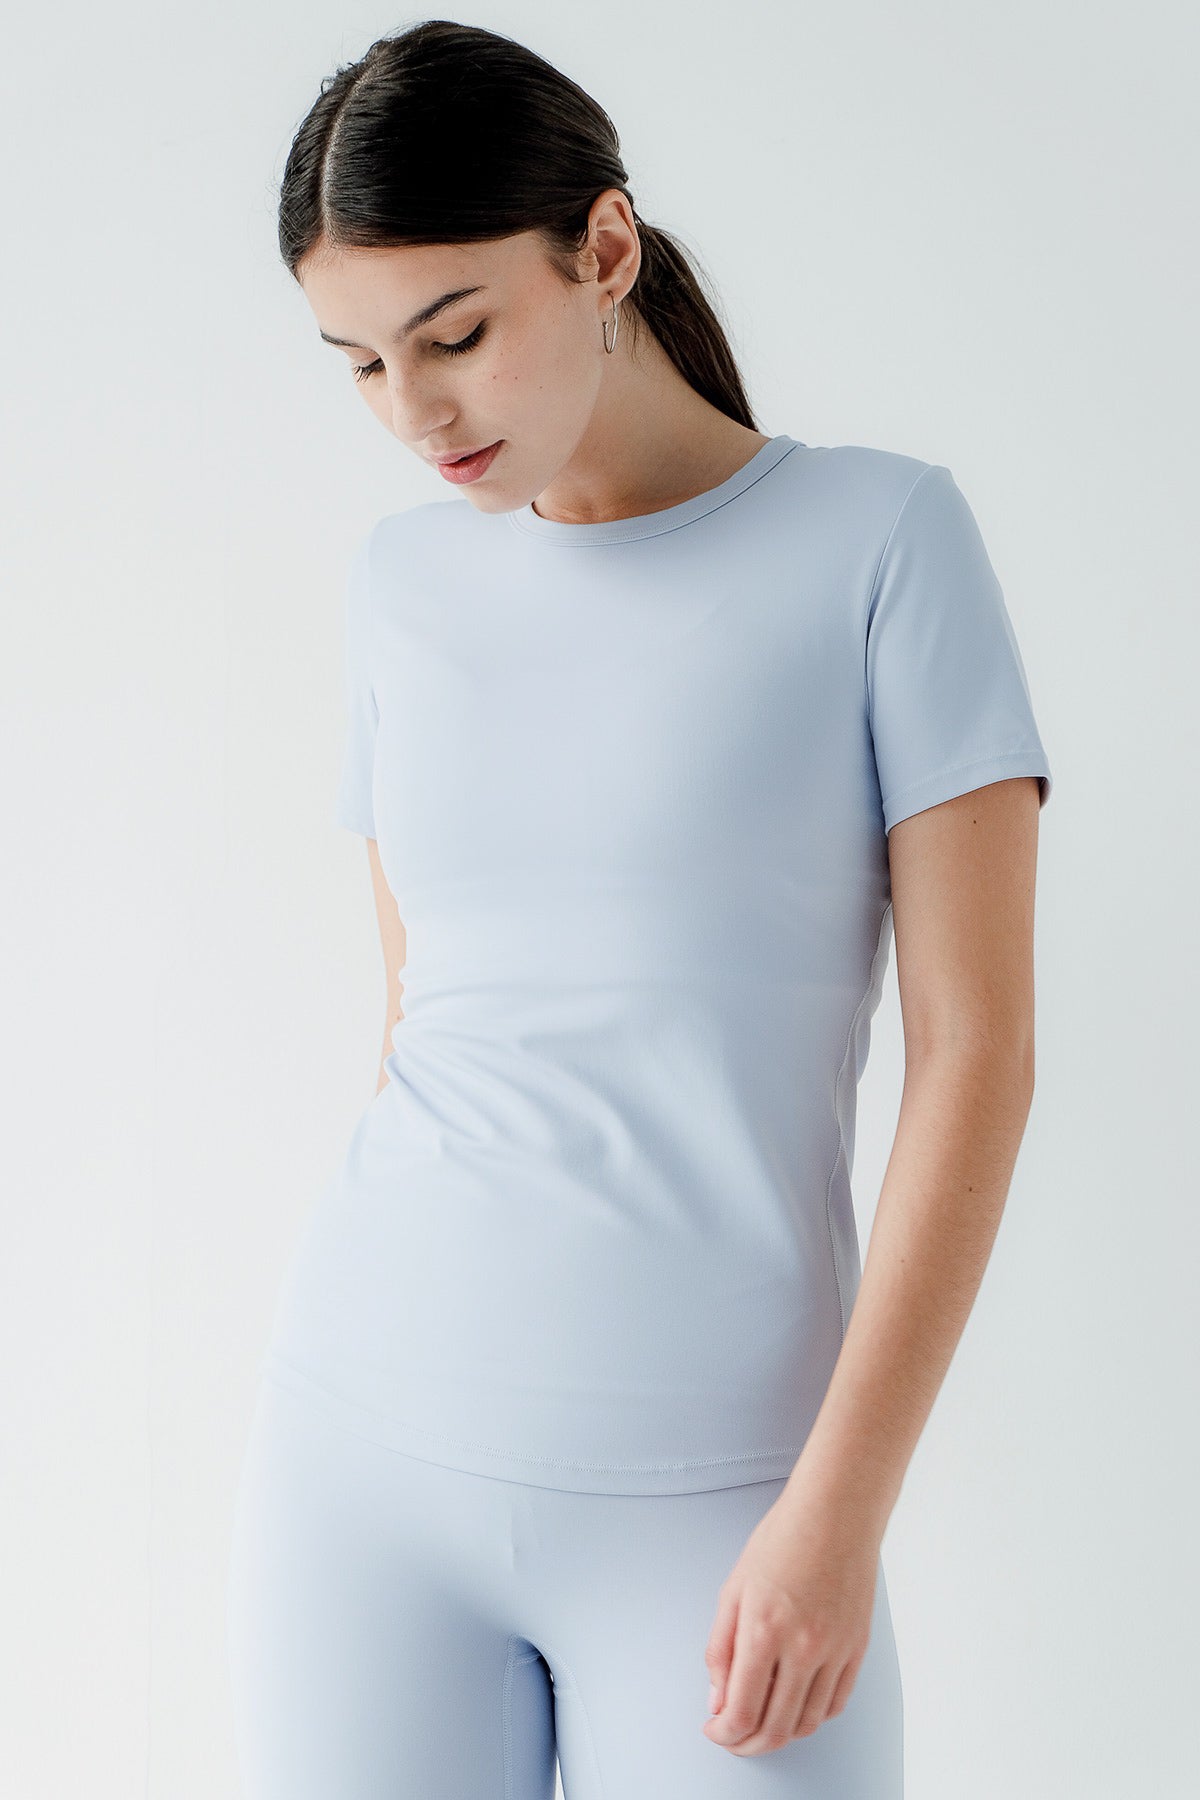 Staple T-shirt In Icy Blue (2XS LEFT)